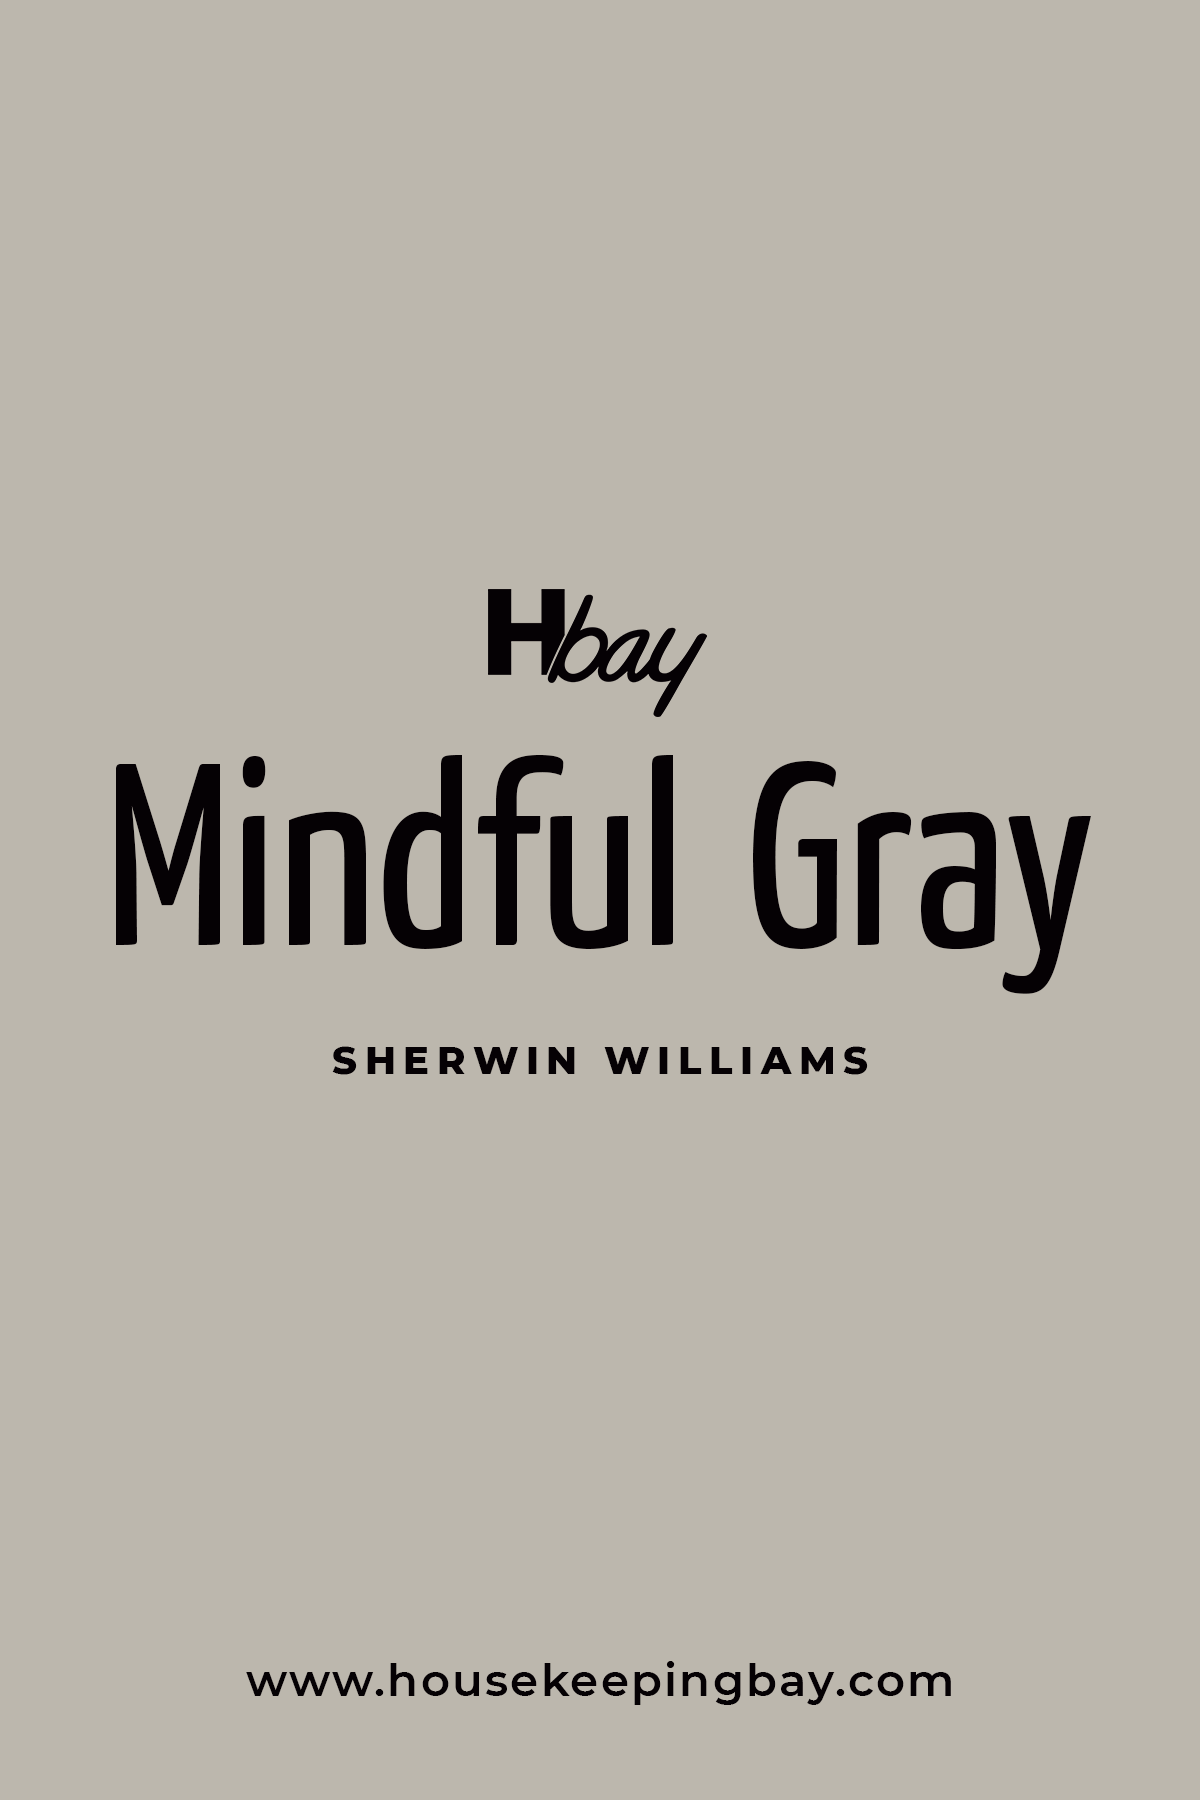 Mindful Gray By Sherwin Williams (1)